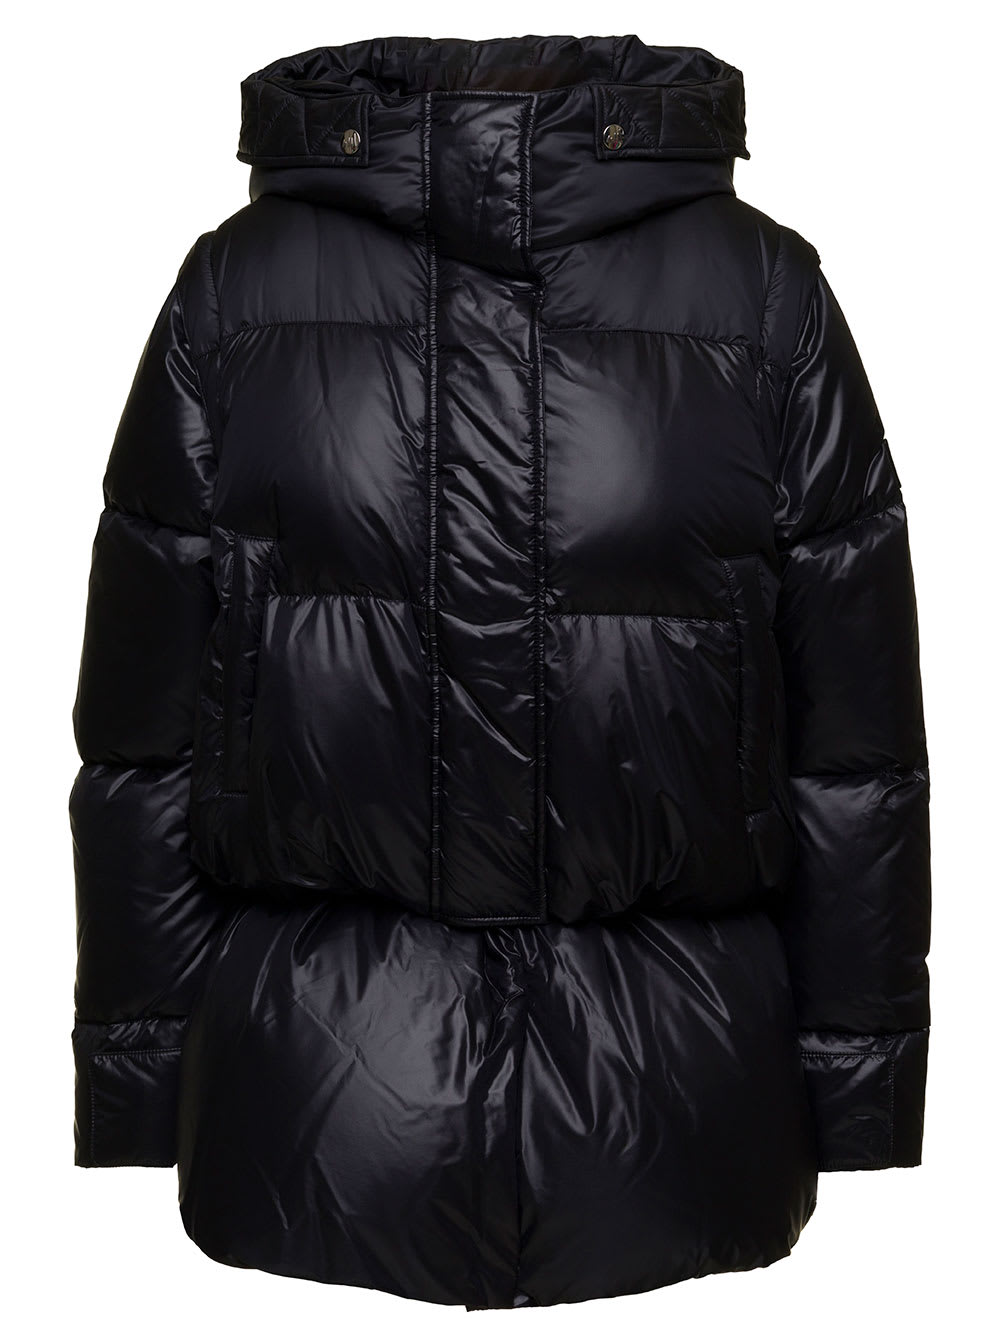 chiara Black Down Jacket With Detachable Sleeves And End Band With Shiny Finish In Nylon Woman Anitroc